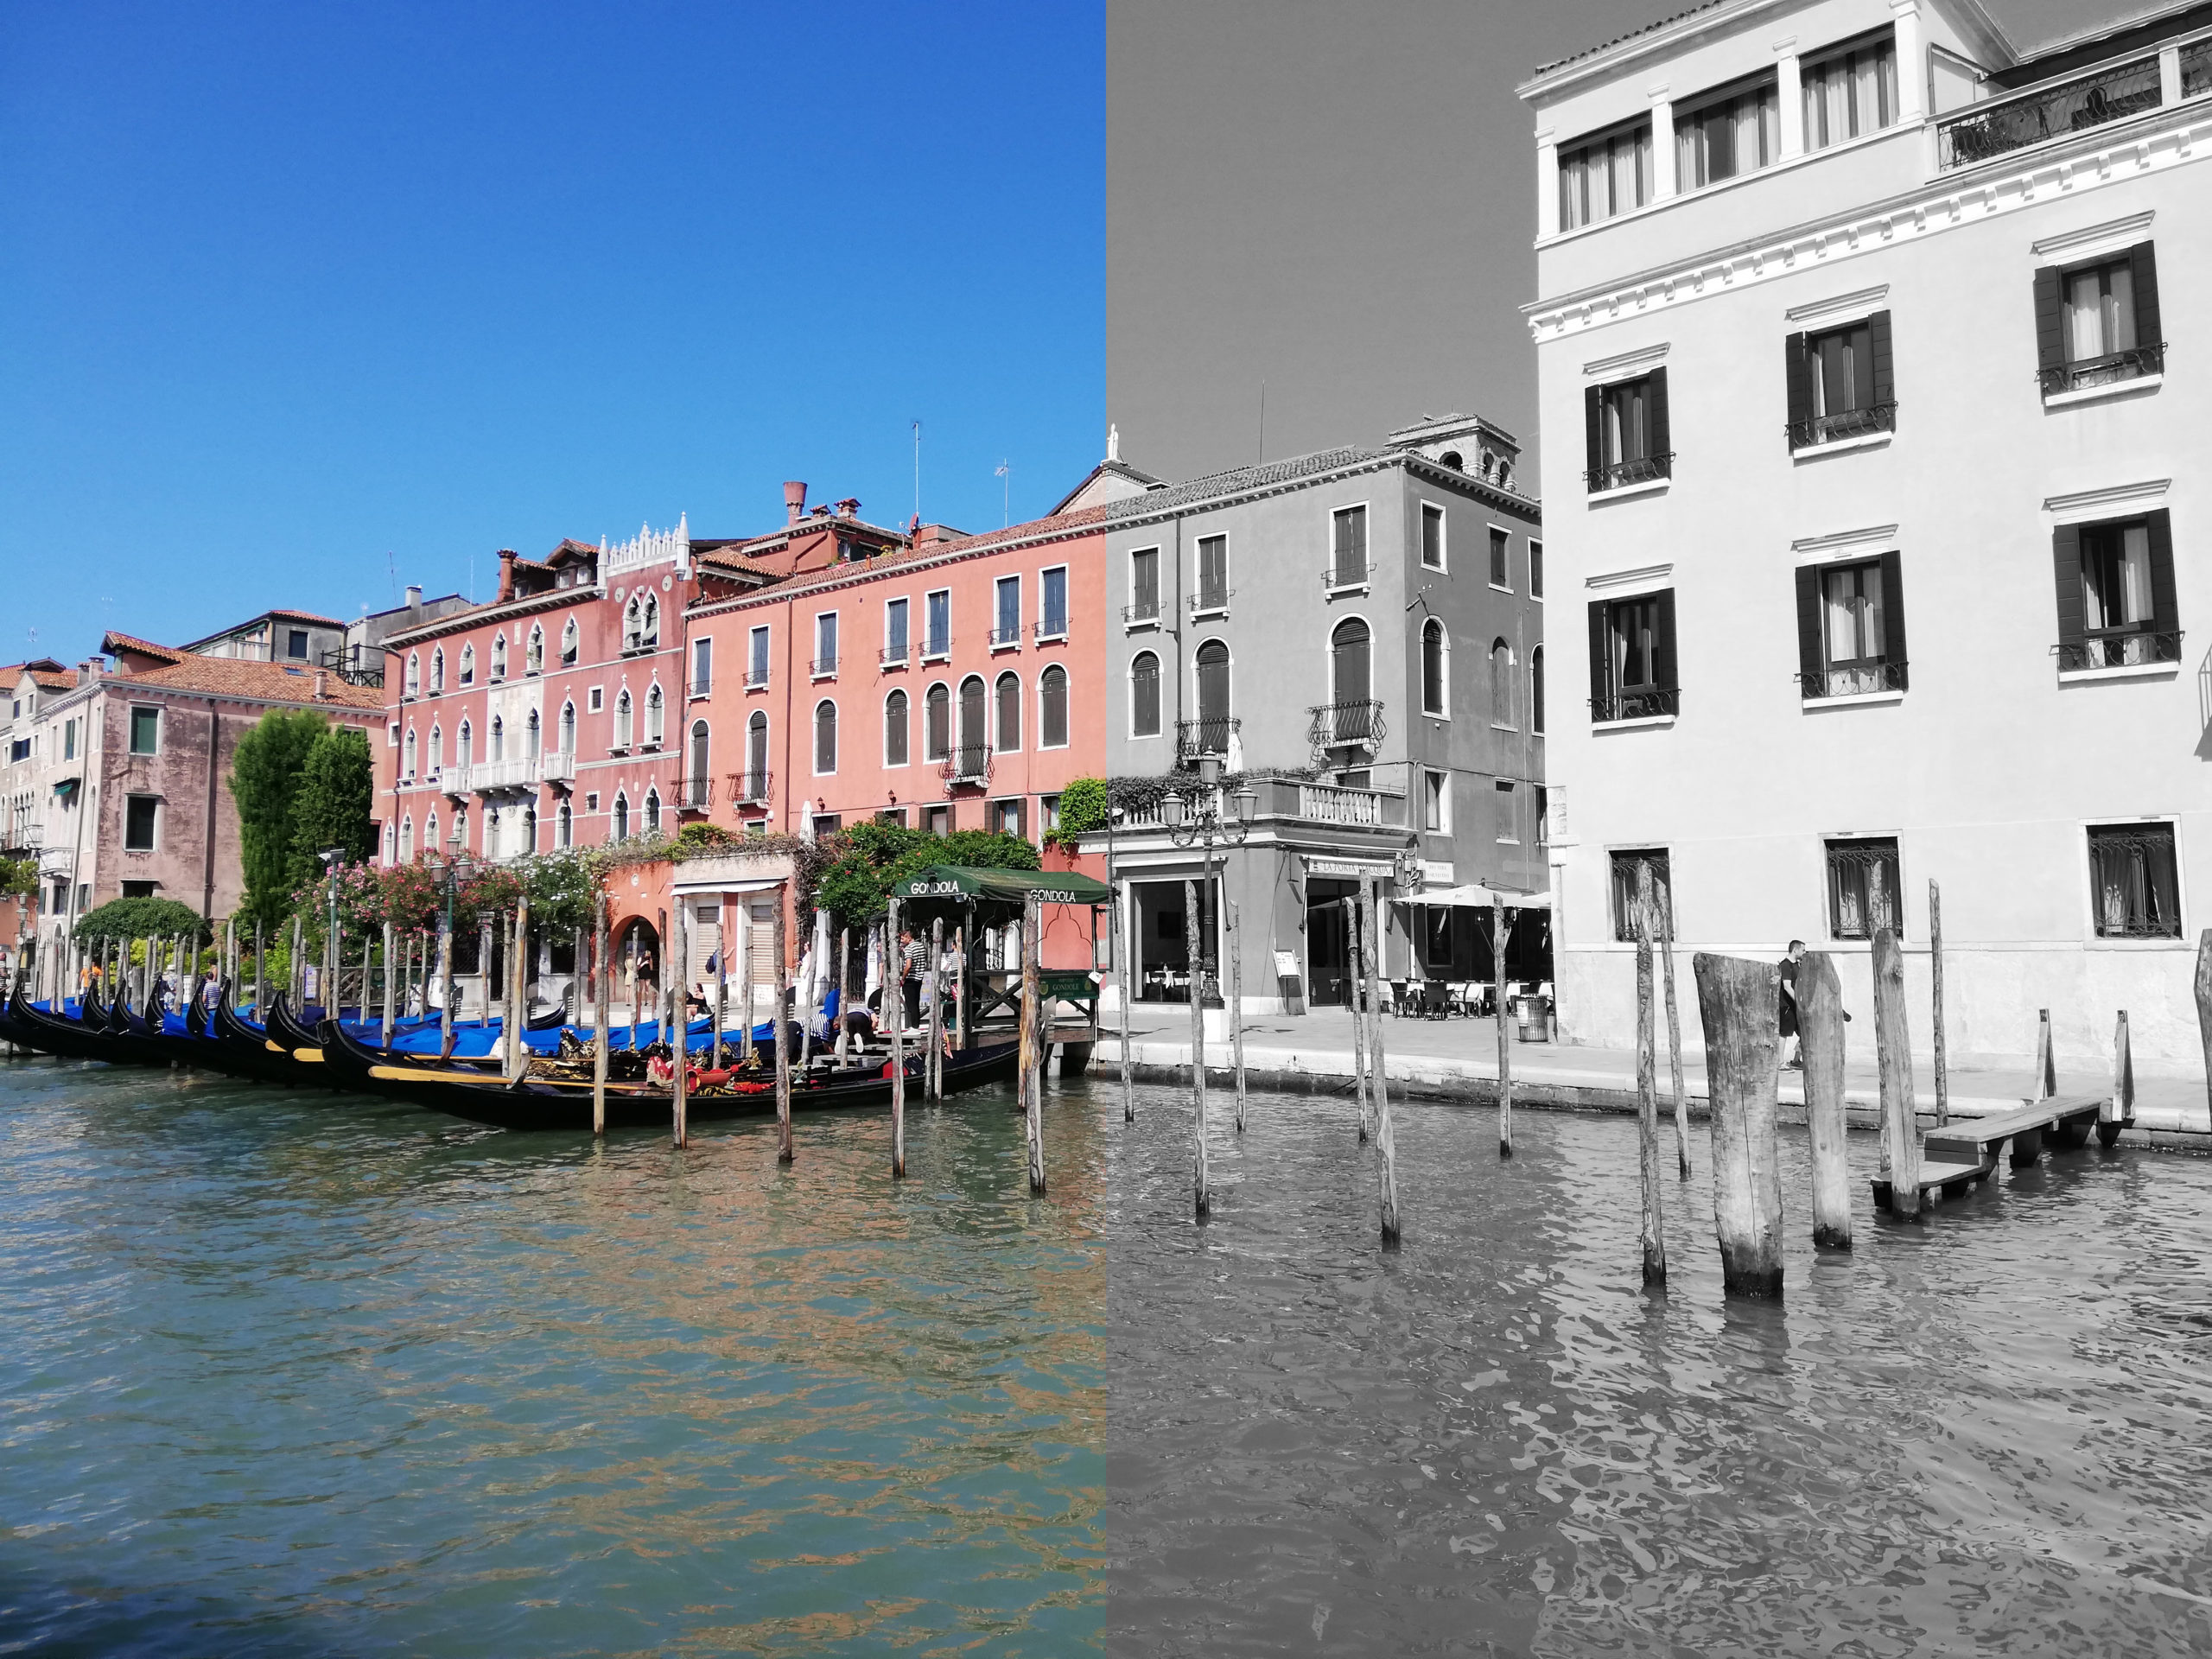 A picture of buildings in Europe along the waterfront. It shows a tale of two chapters, with one half of the picture in color and the other half black and white